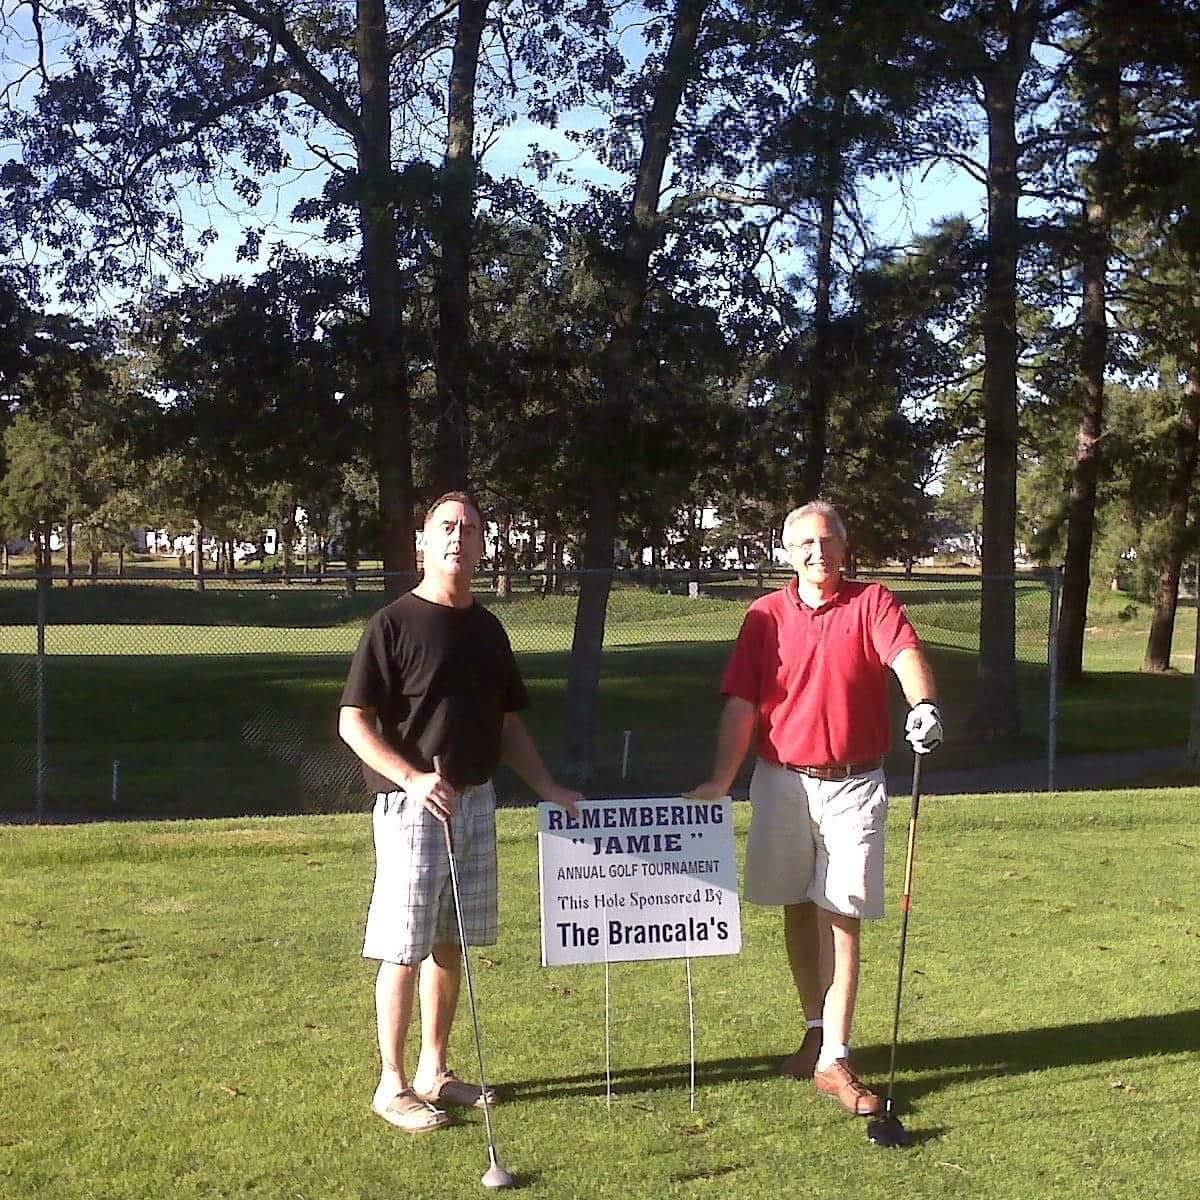 two men standing on a golf course holding golf clubs and a sign that says 